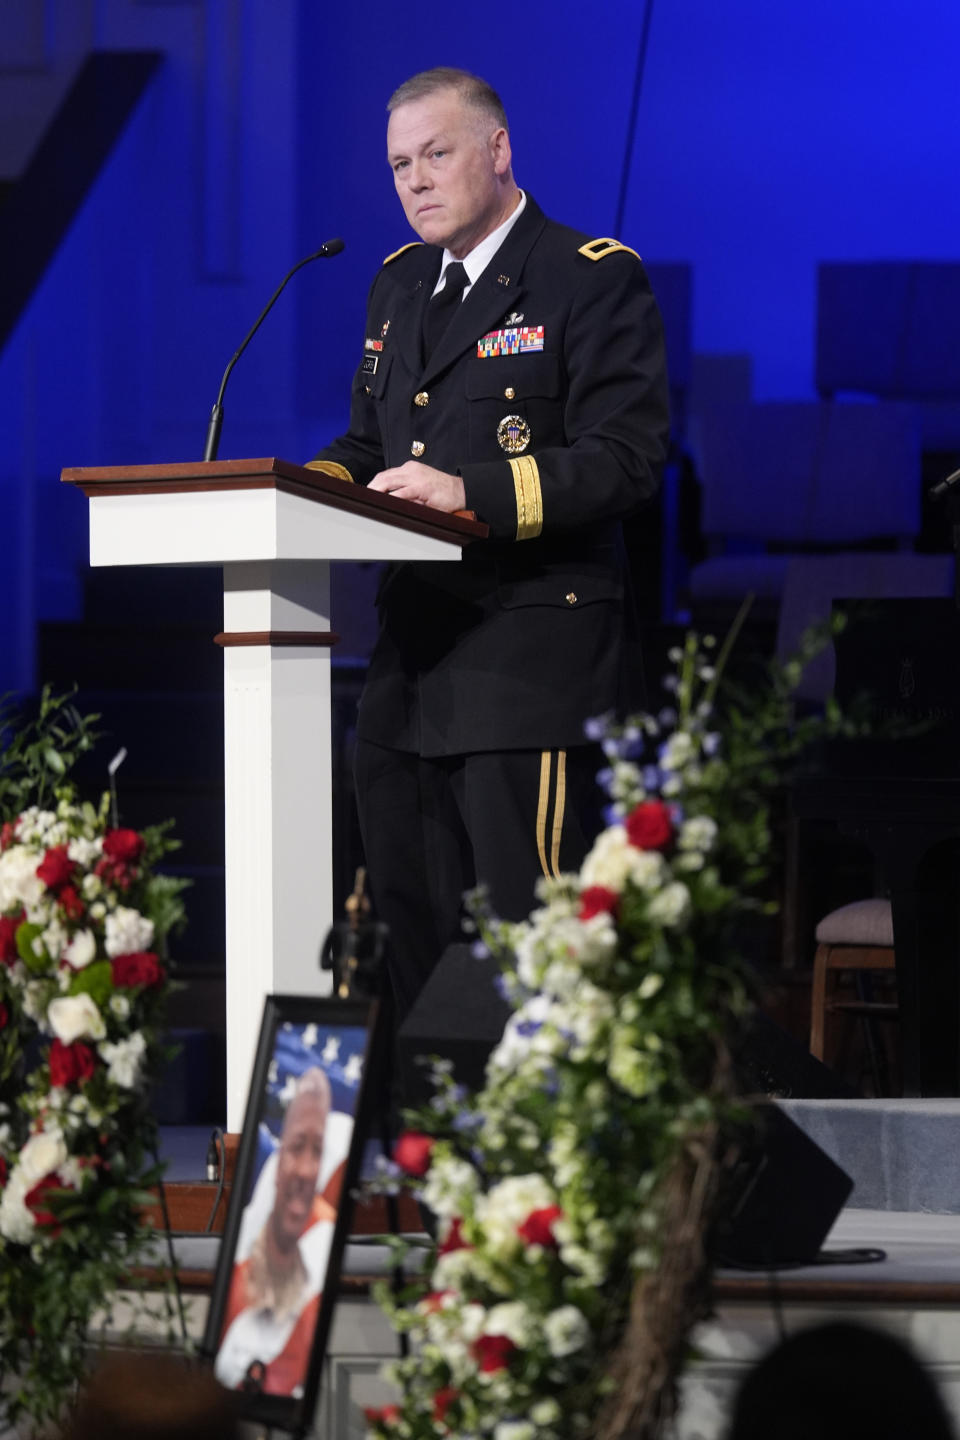 Brigadier Gen. Todd Lazaroski speaks during a funeral service for Army Reserve soldier Staff Sgt. William Jerome Rivers Tuesday, Feb. 13, 2024, in Carrollton, Ga. Rivers was one of three Georgia soldiers killed last month in drone attack in Jordan. (AP Photo/John Bazemore)